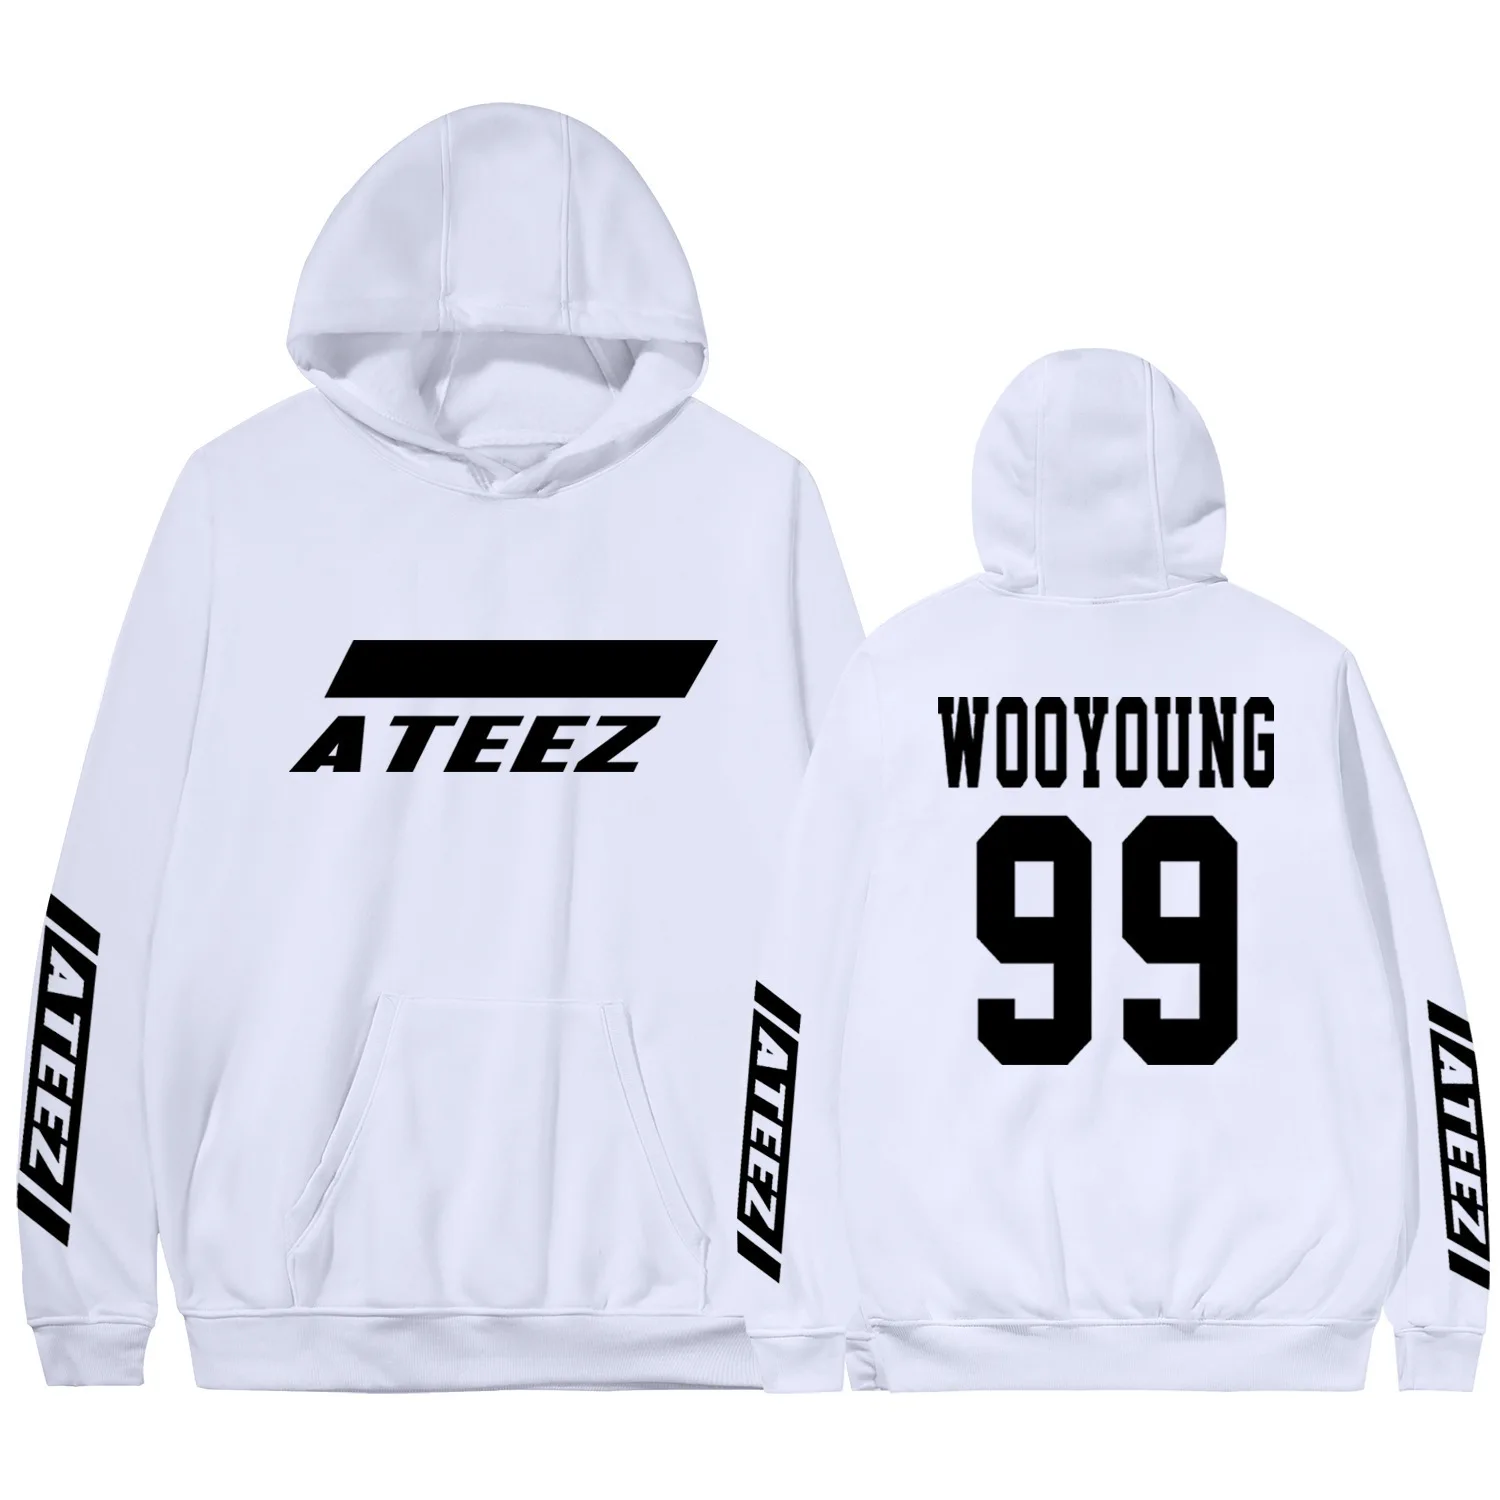 Ateez Sweatshirts (Official Collection)